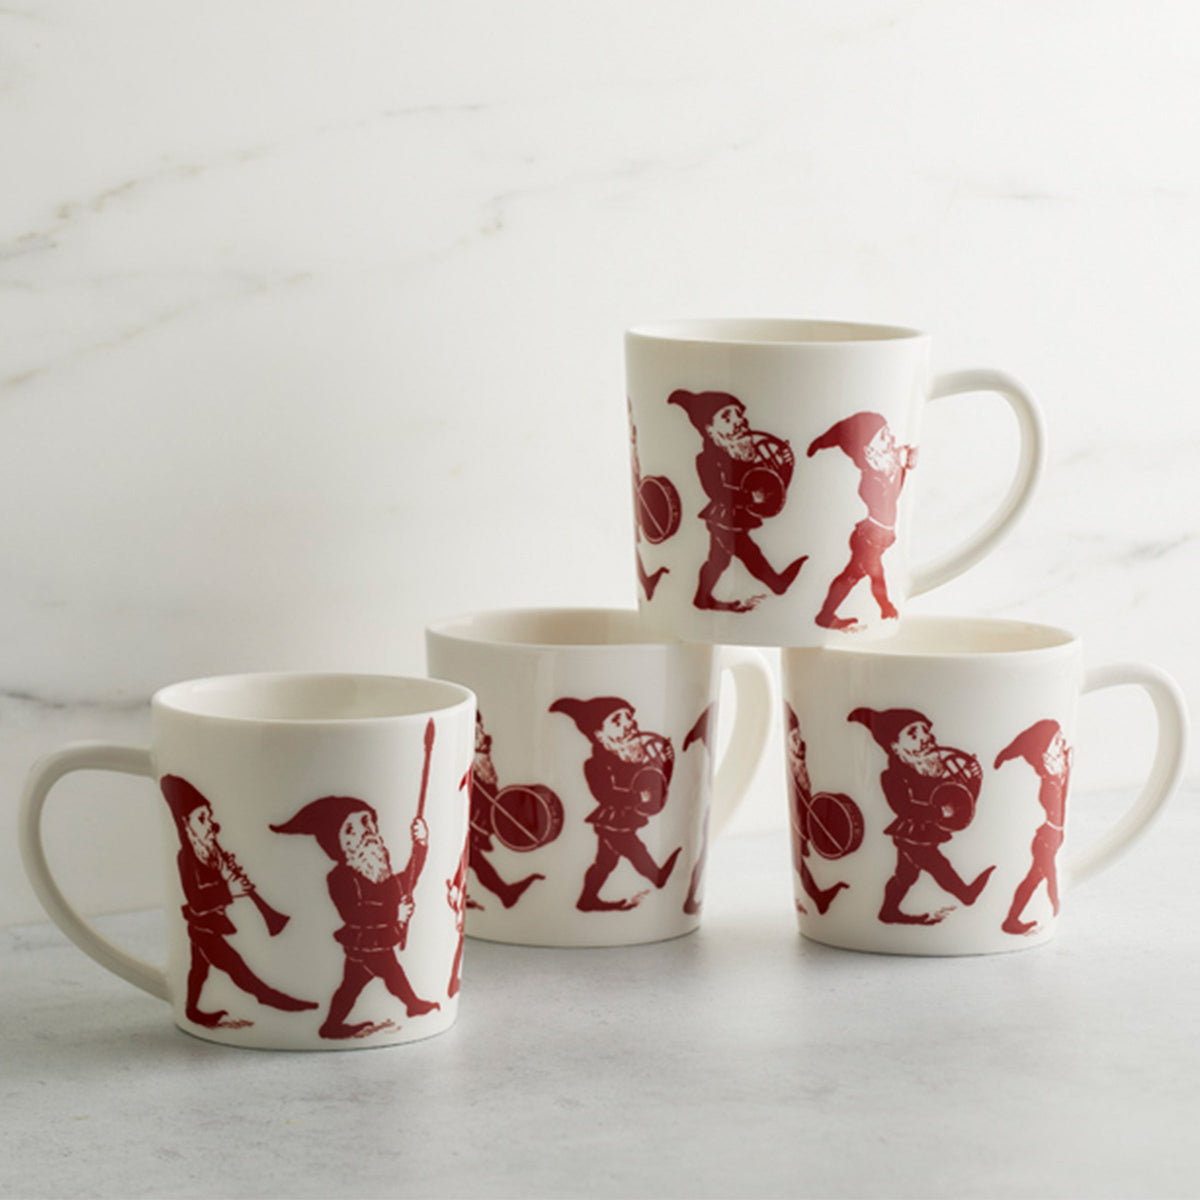 Four porcelain &quot;Elves Mug&quot; by Caskata Artisanal Home with red illustrations of playful elves, stacked in a pyramid formation, placed on a white surface with a marble background. This delightful holiday collection adds a whimsical touch to any festive setting.